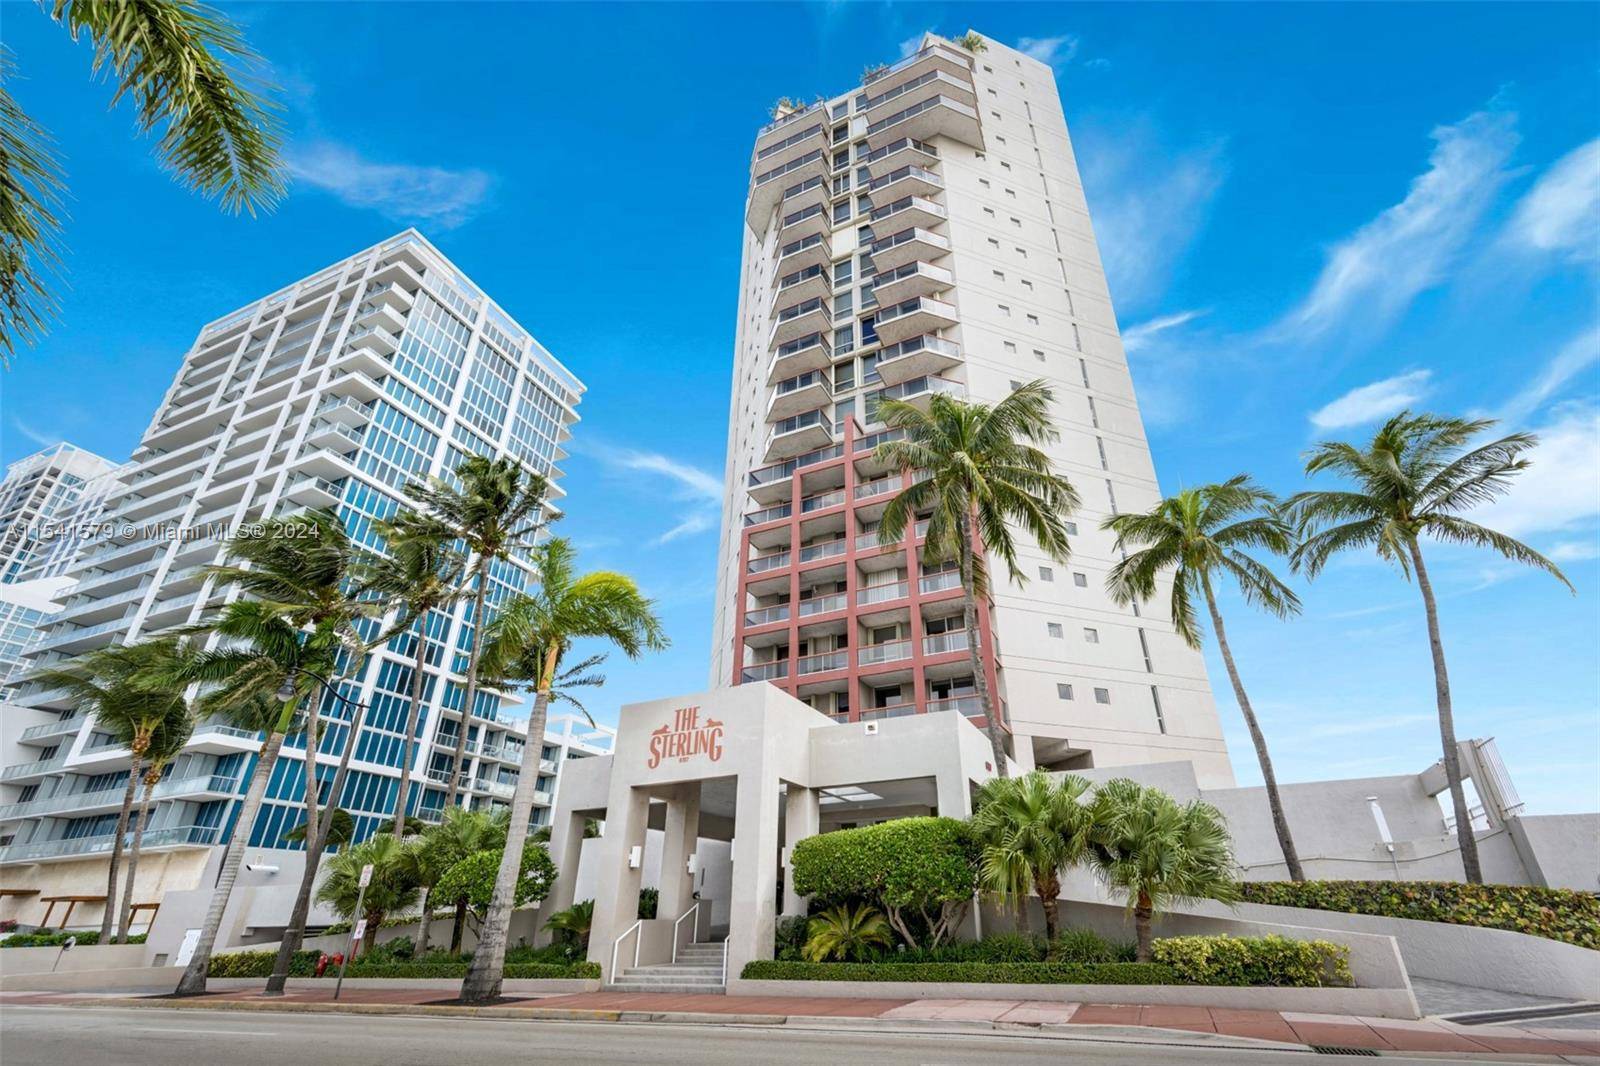 Imagine a sleek and spacious 2 bed 2bath apartment right on the beachfront, boasting panoramic views of the ocean from every room that flood the living space with natural light, ...